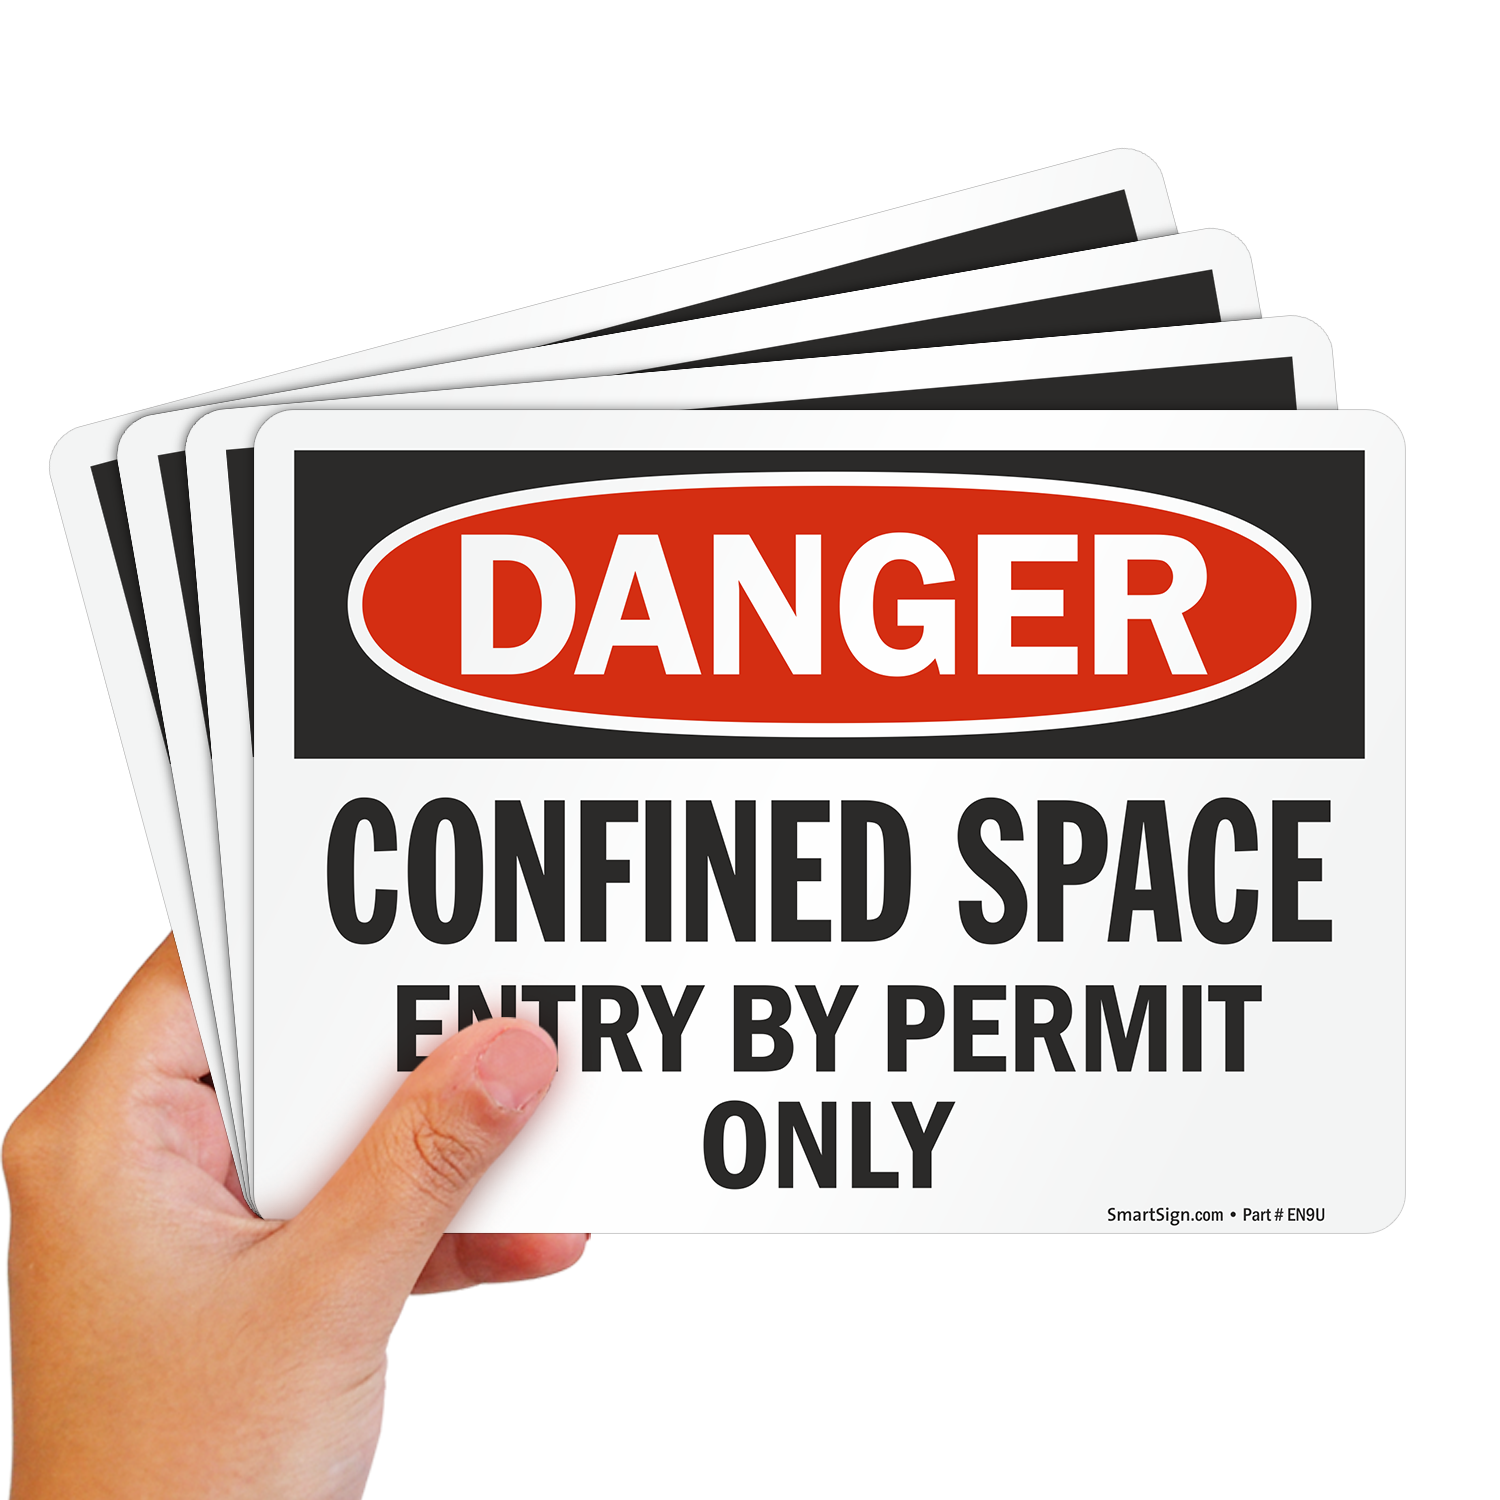 Enter by Permit Only Confined Space Aluma-Lite MCSP133XL AccuformDanger Confined Space 7 x 10 Inches 